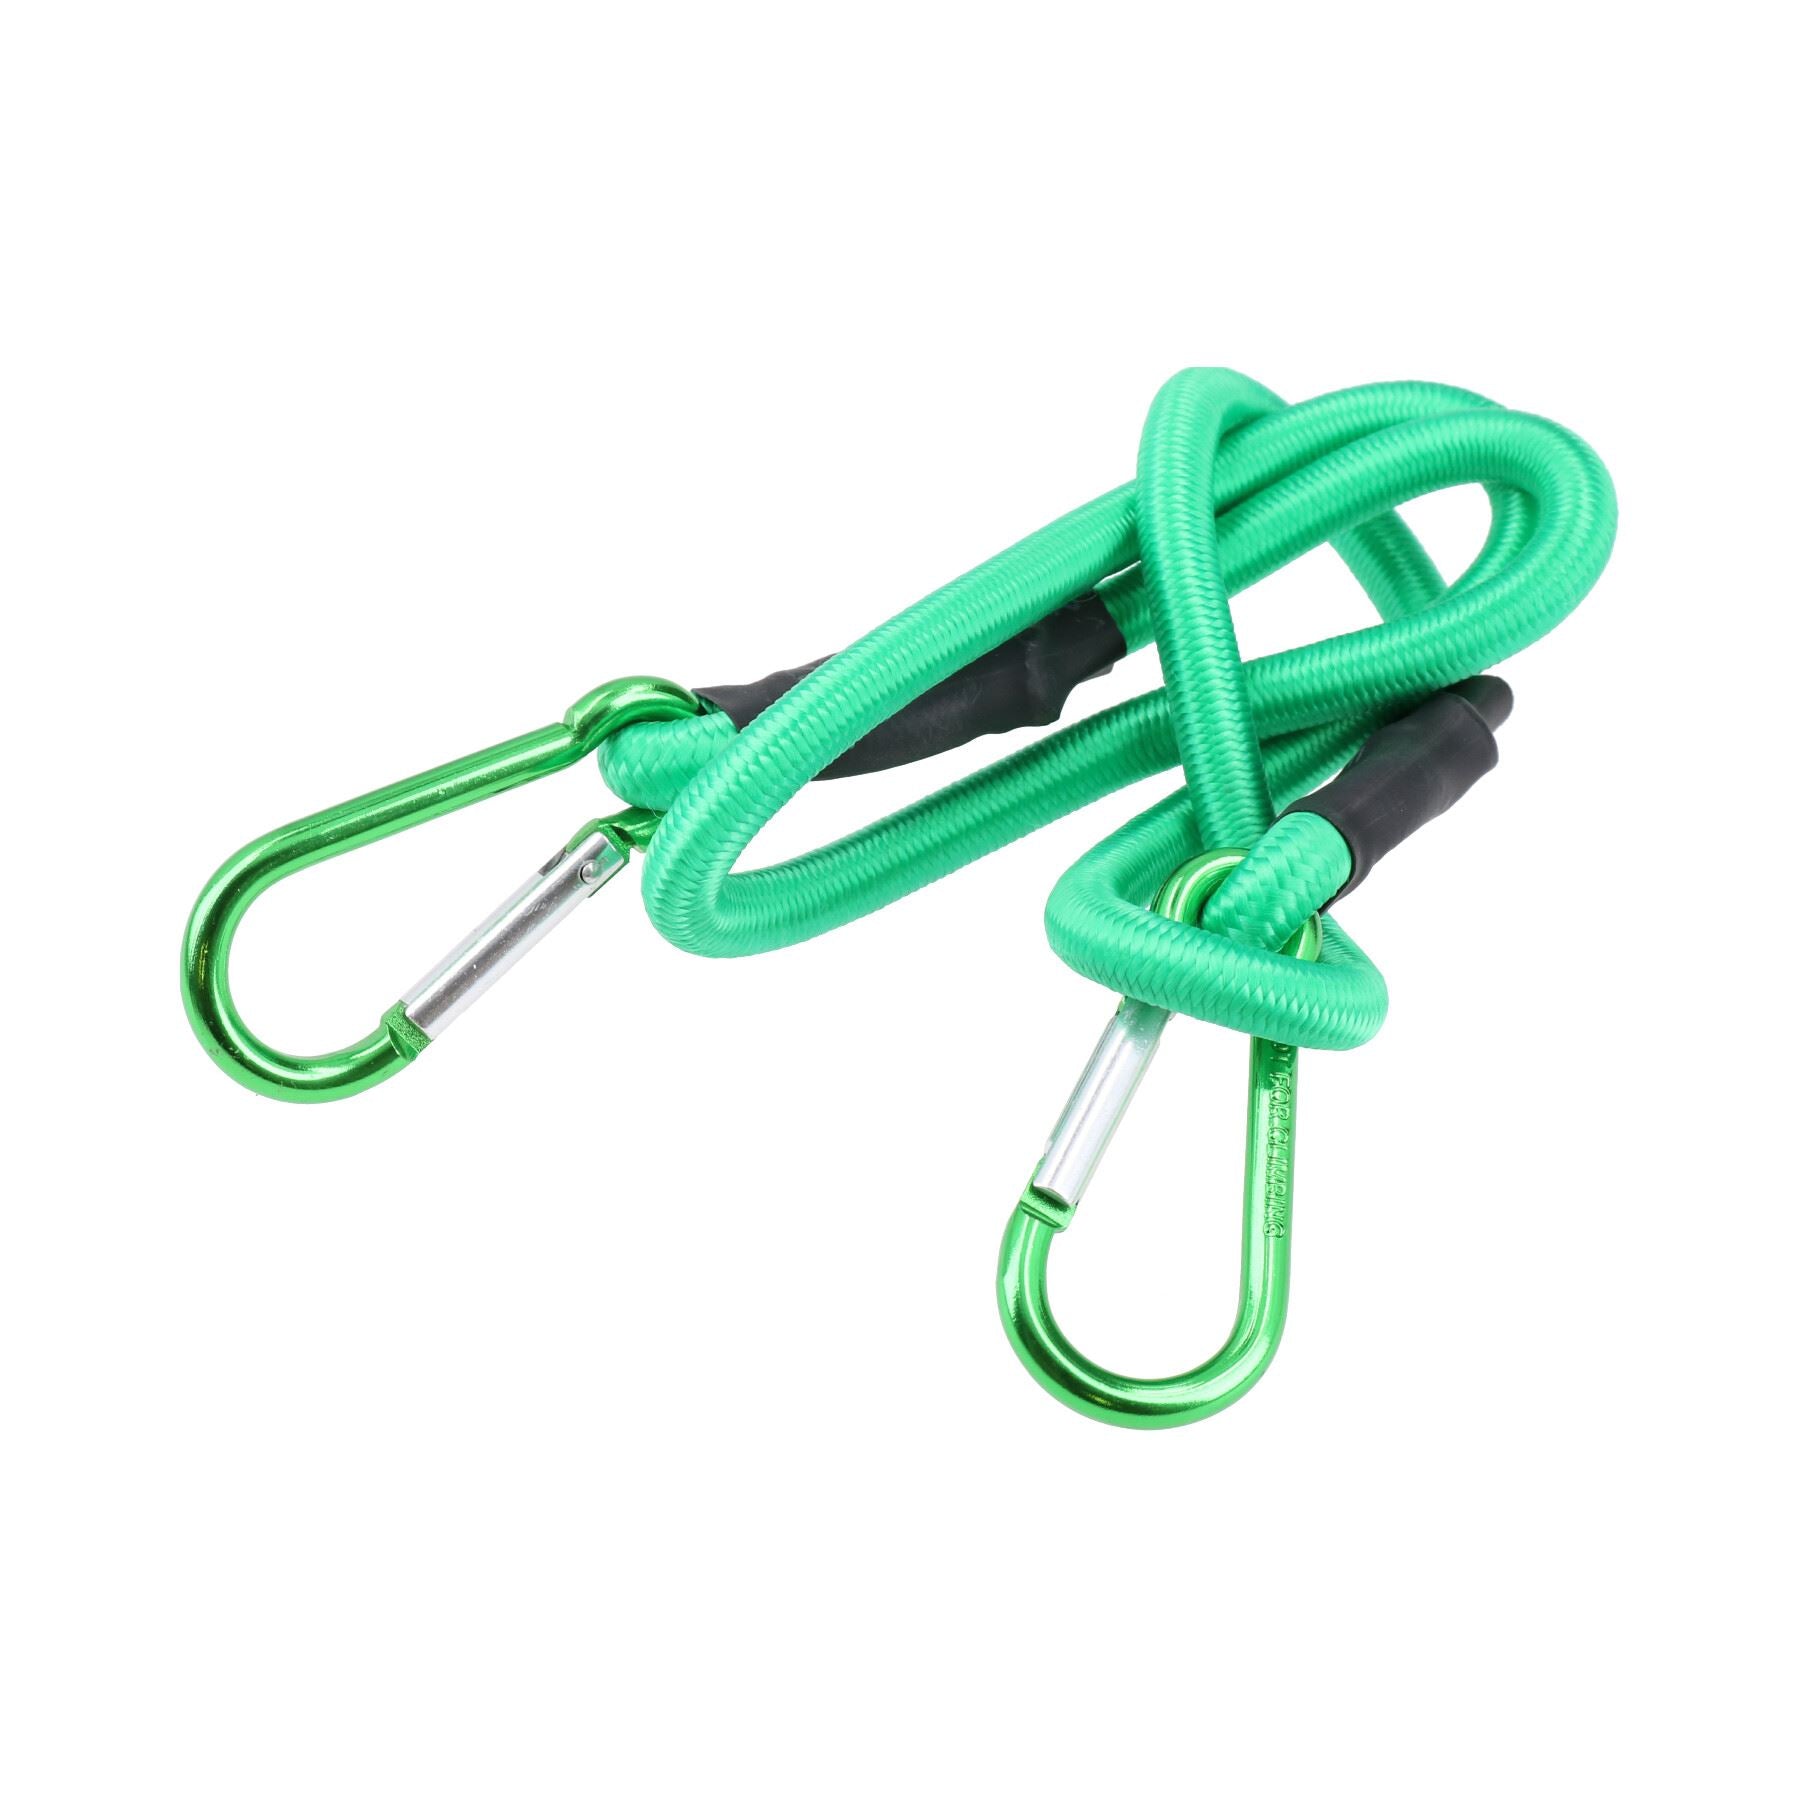 36” Bungee Rope with Carabiner Clips Cords Elastic Tie Down Fasteners